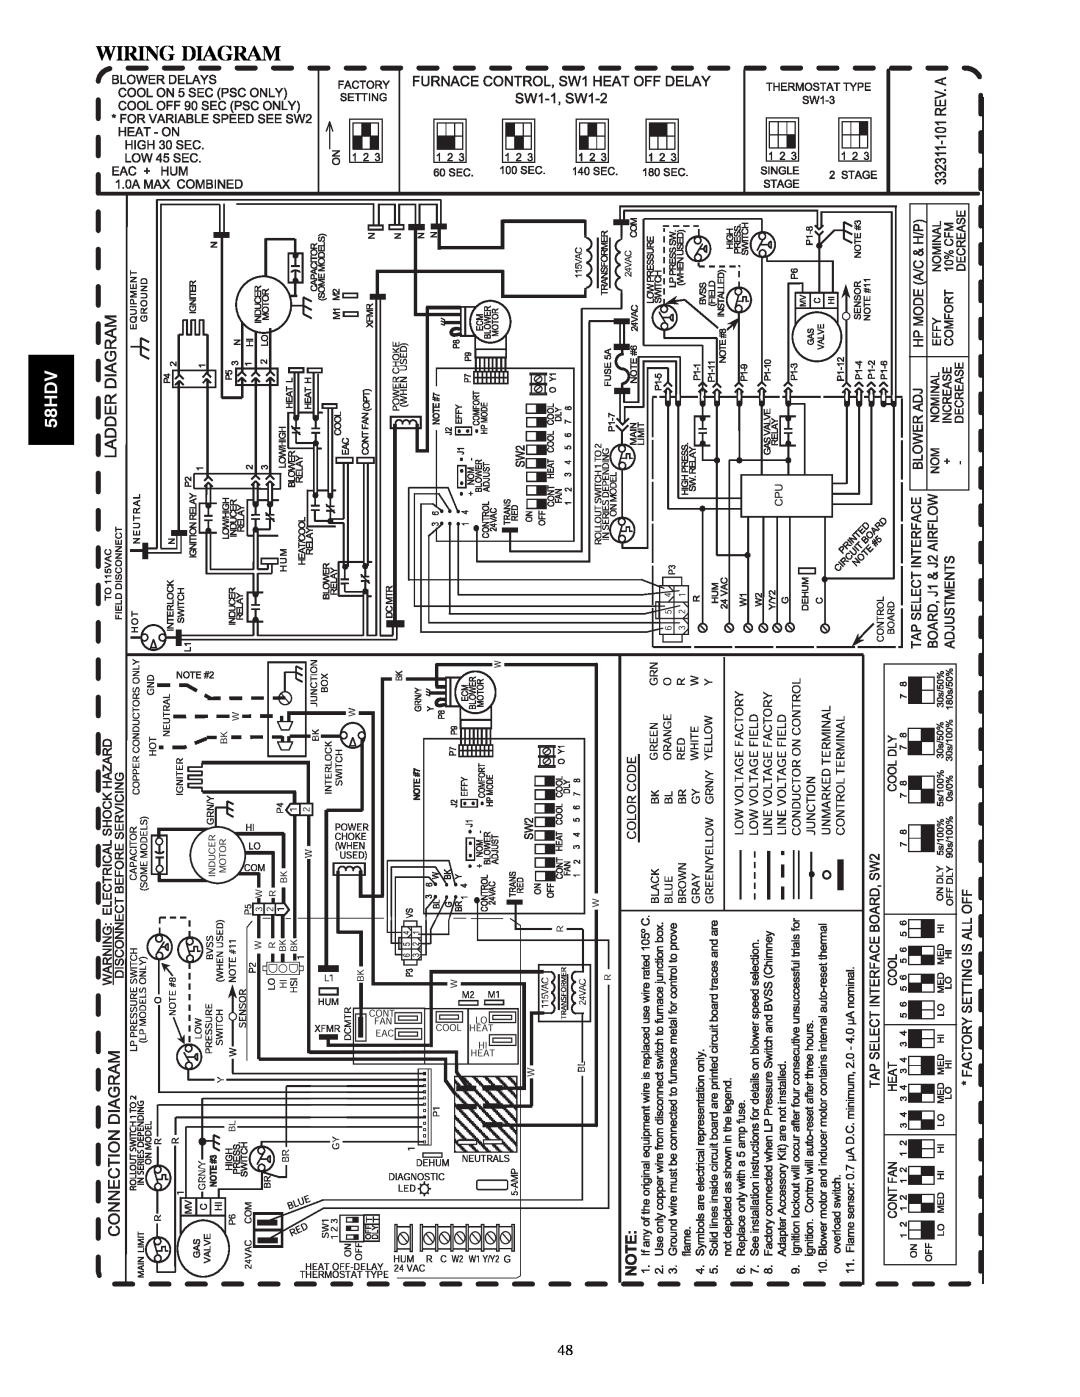 Carrier 58HDV installation instructions Wiring Diagram 